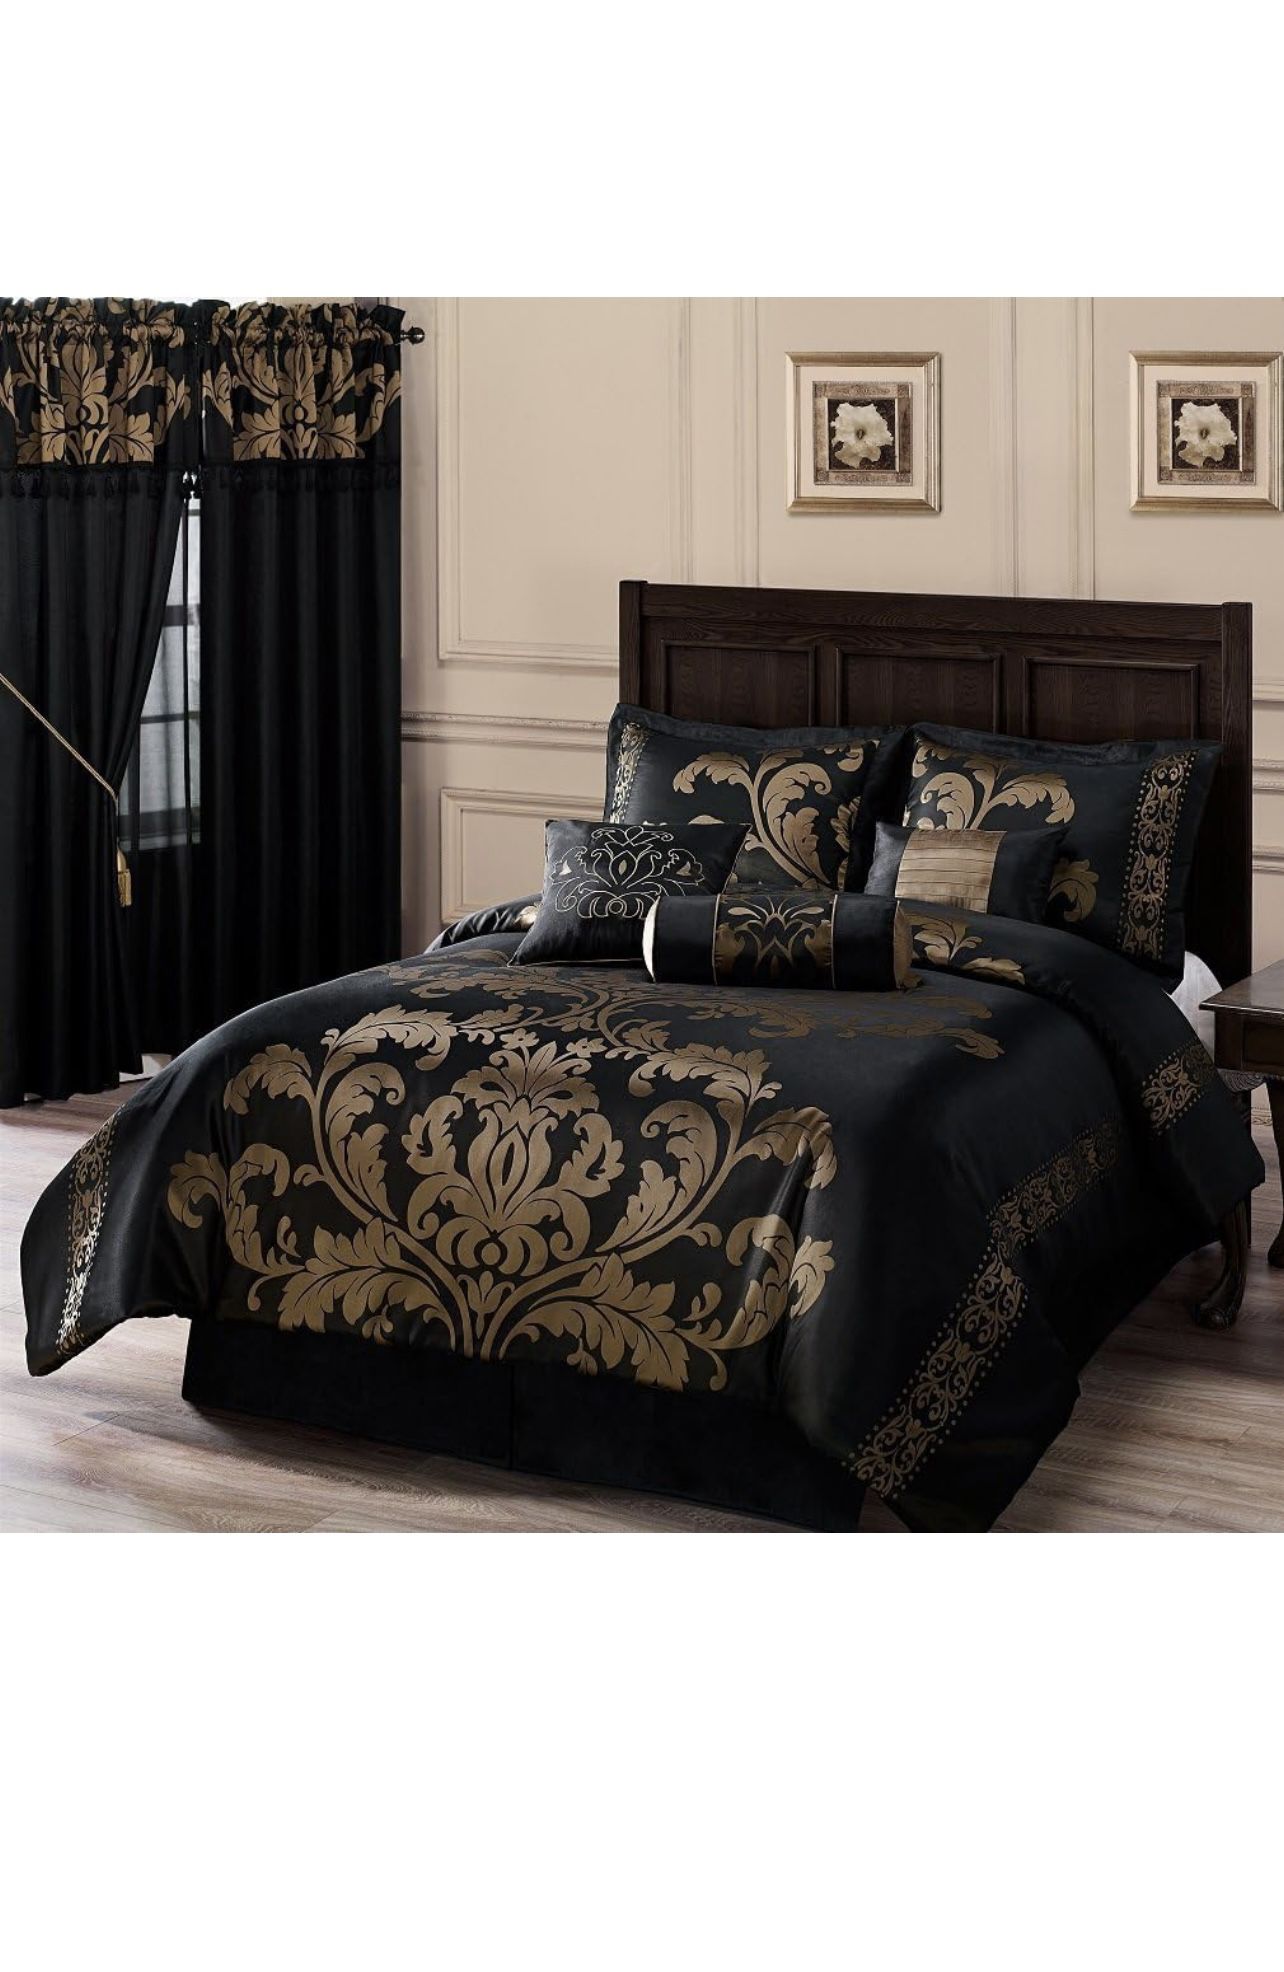 Chezmoi Collection 7-Piece Jacquard Floral Comforter Set/Bed-in-a-Bag Set, King, Black Gold